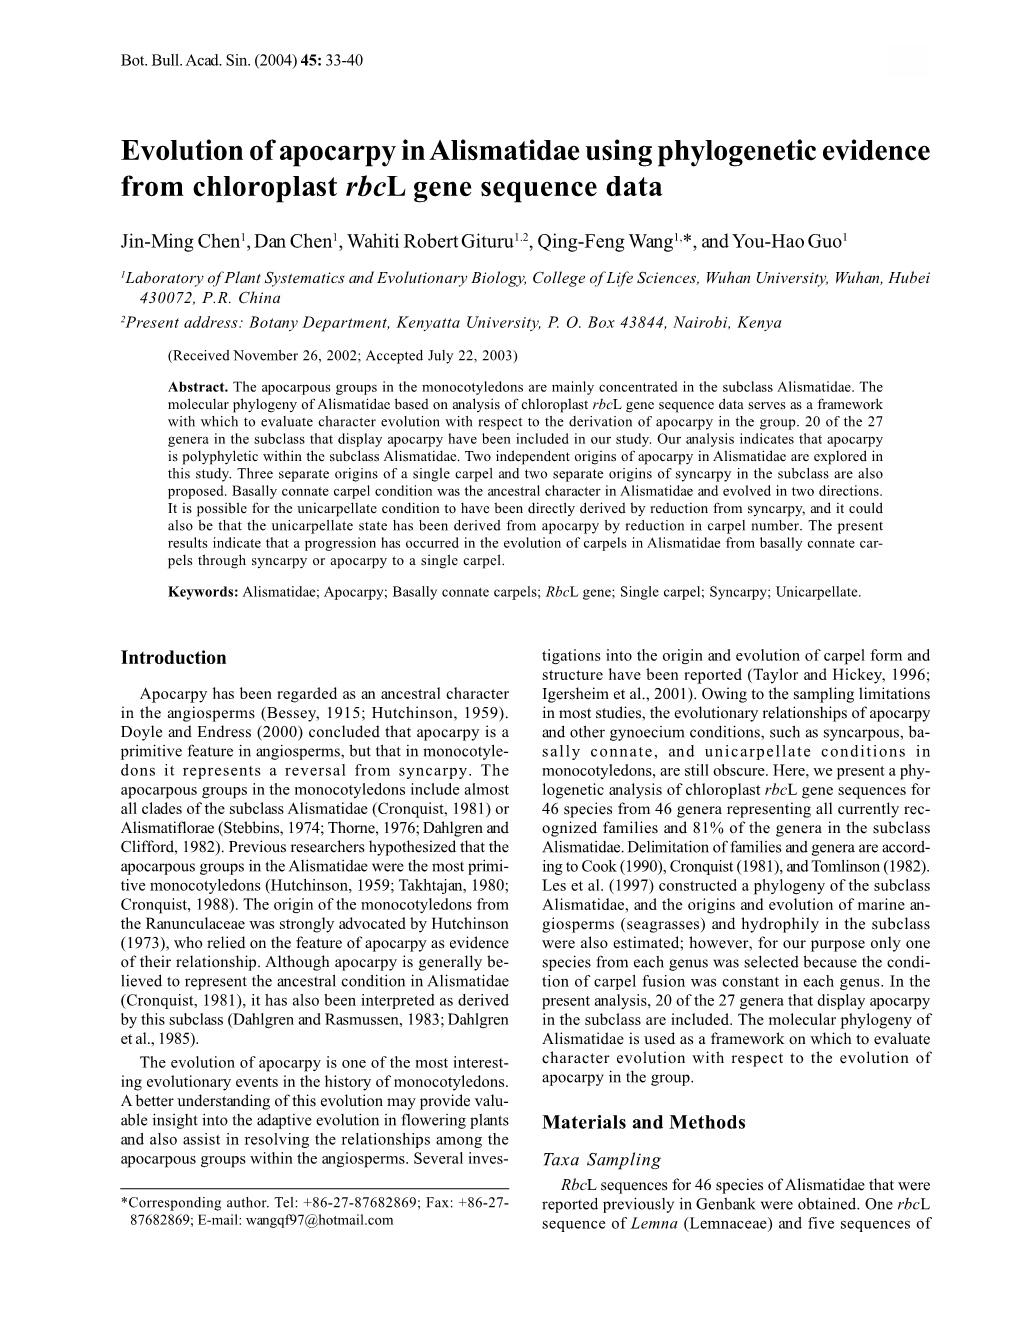 Evolution of Apocarpy in Alismatidae Using Phylogenetic Evidence from Chloroplast Rbcl Gene Sequence Data